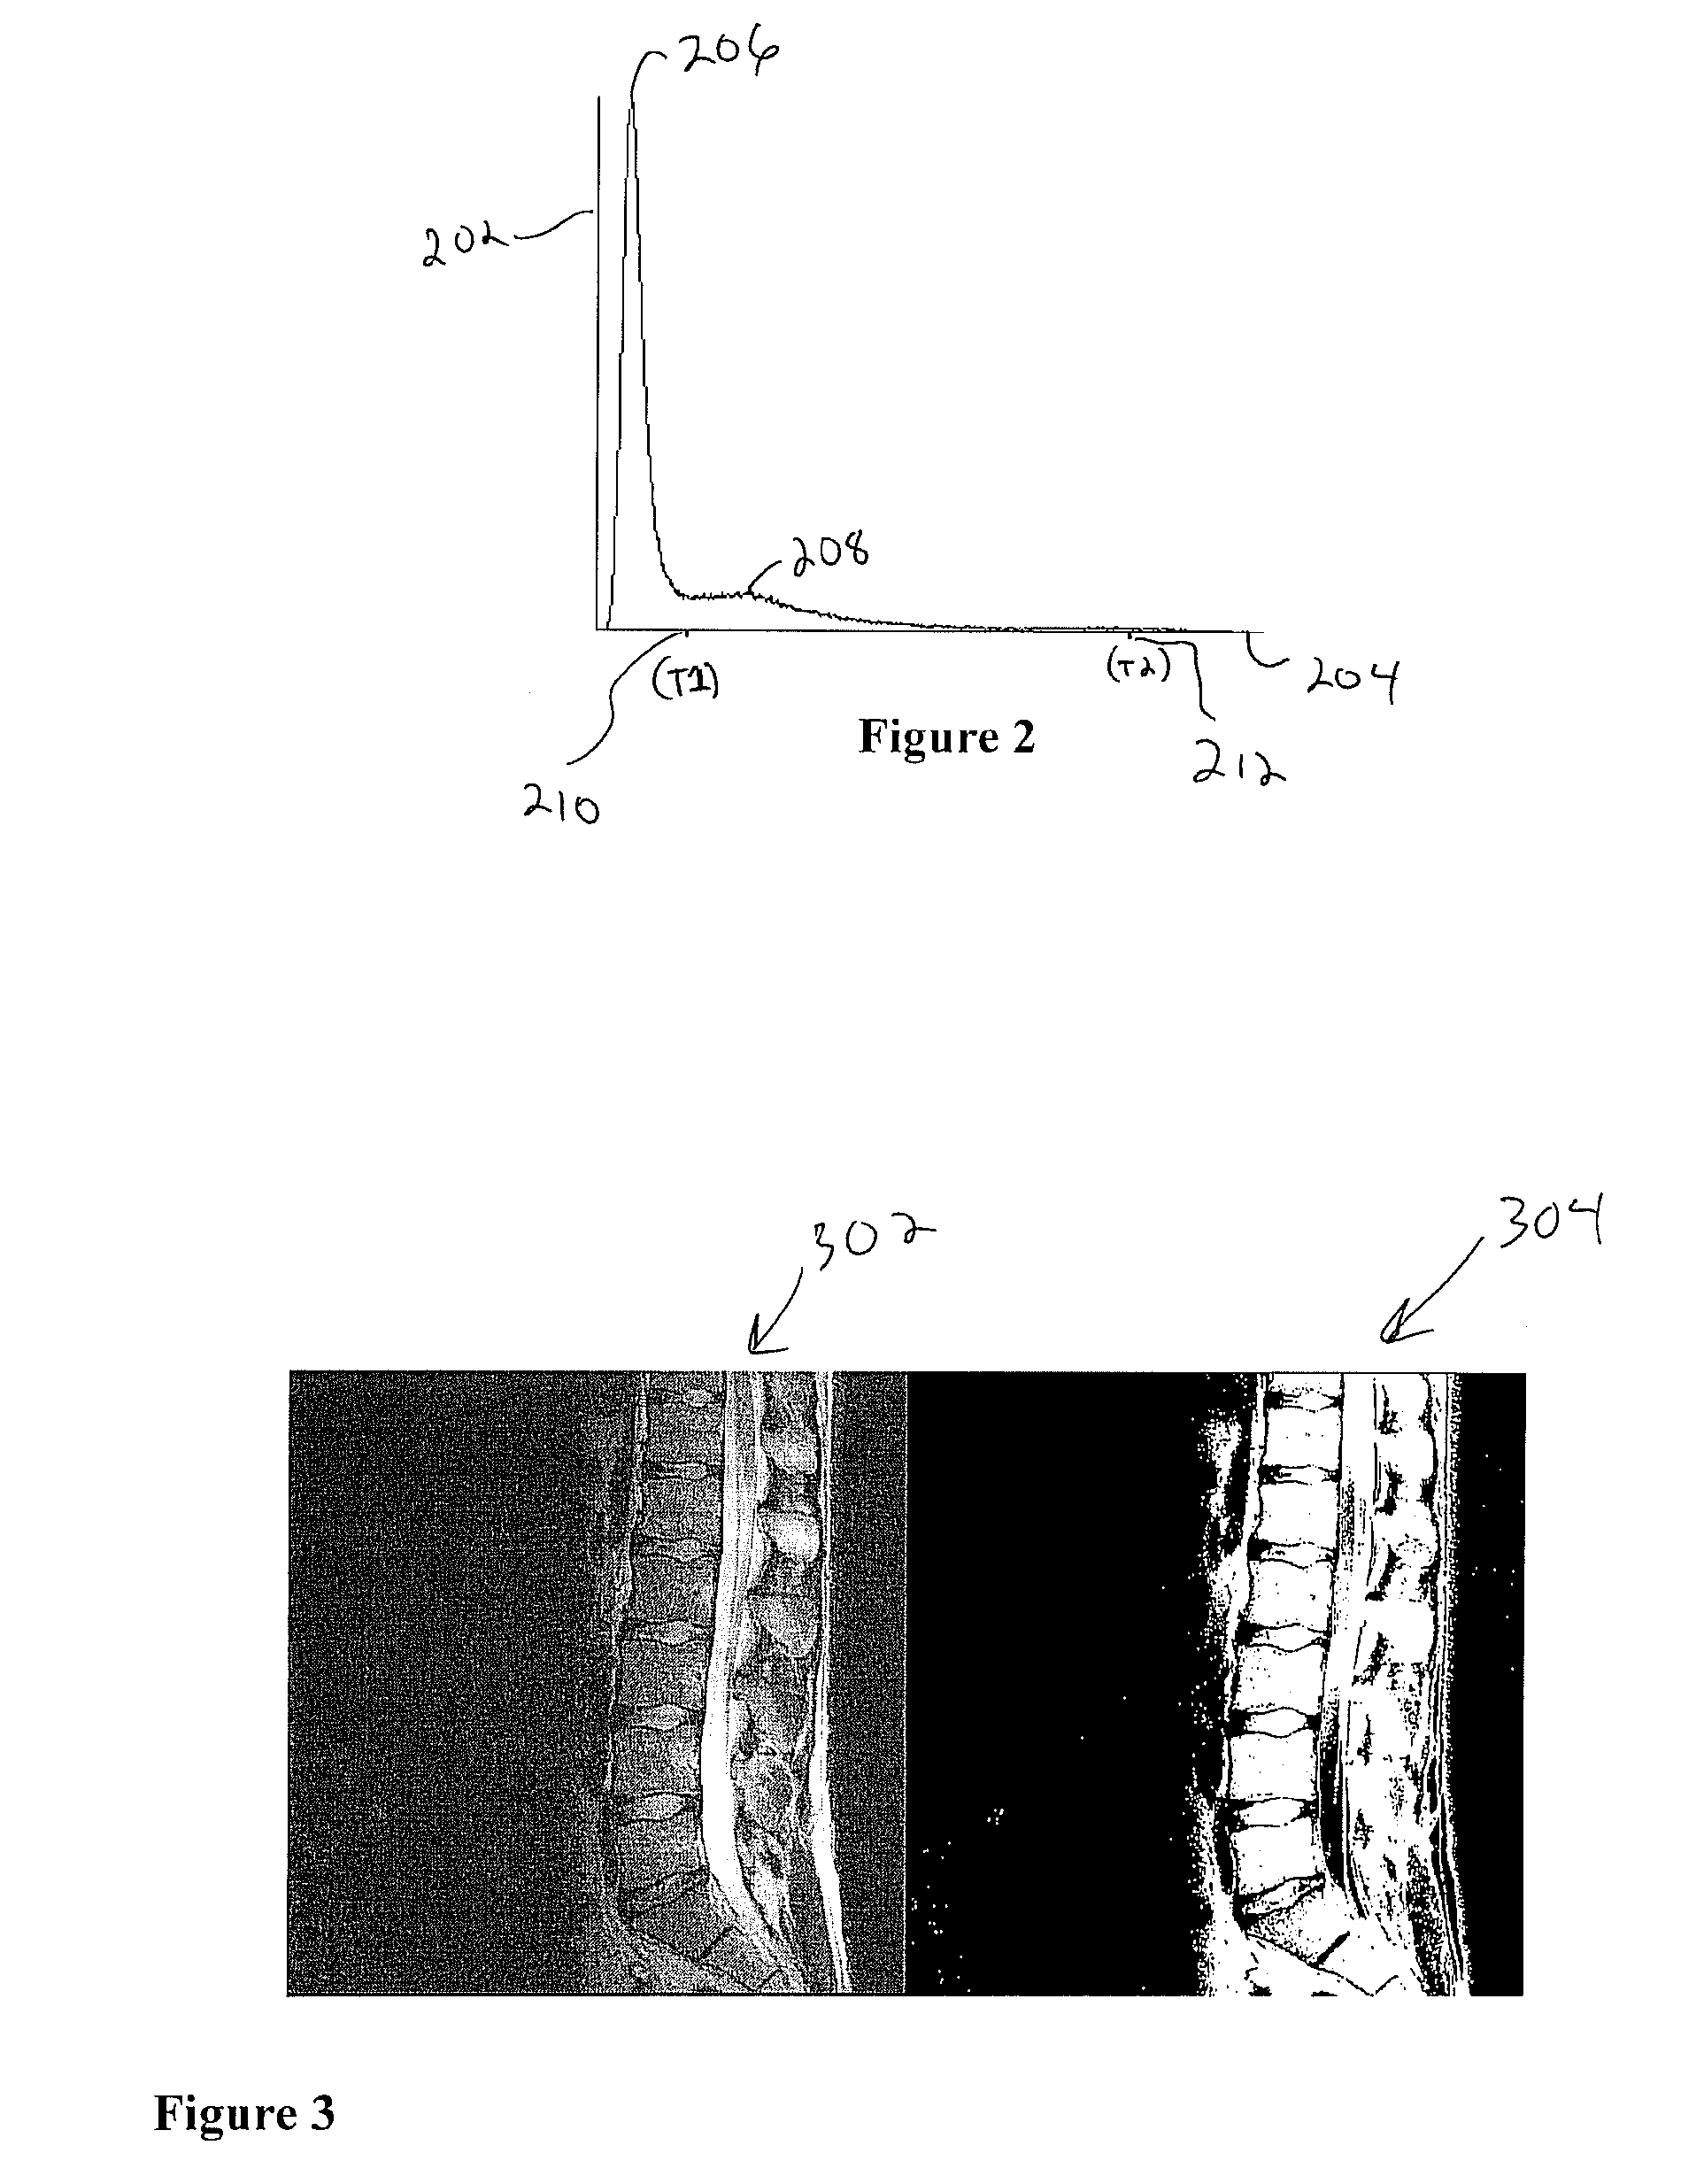 Method and system for vertebrae and intervertebral disc localization in magnetic resonance images